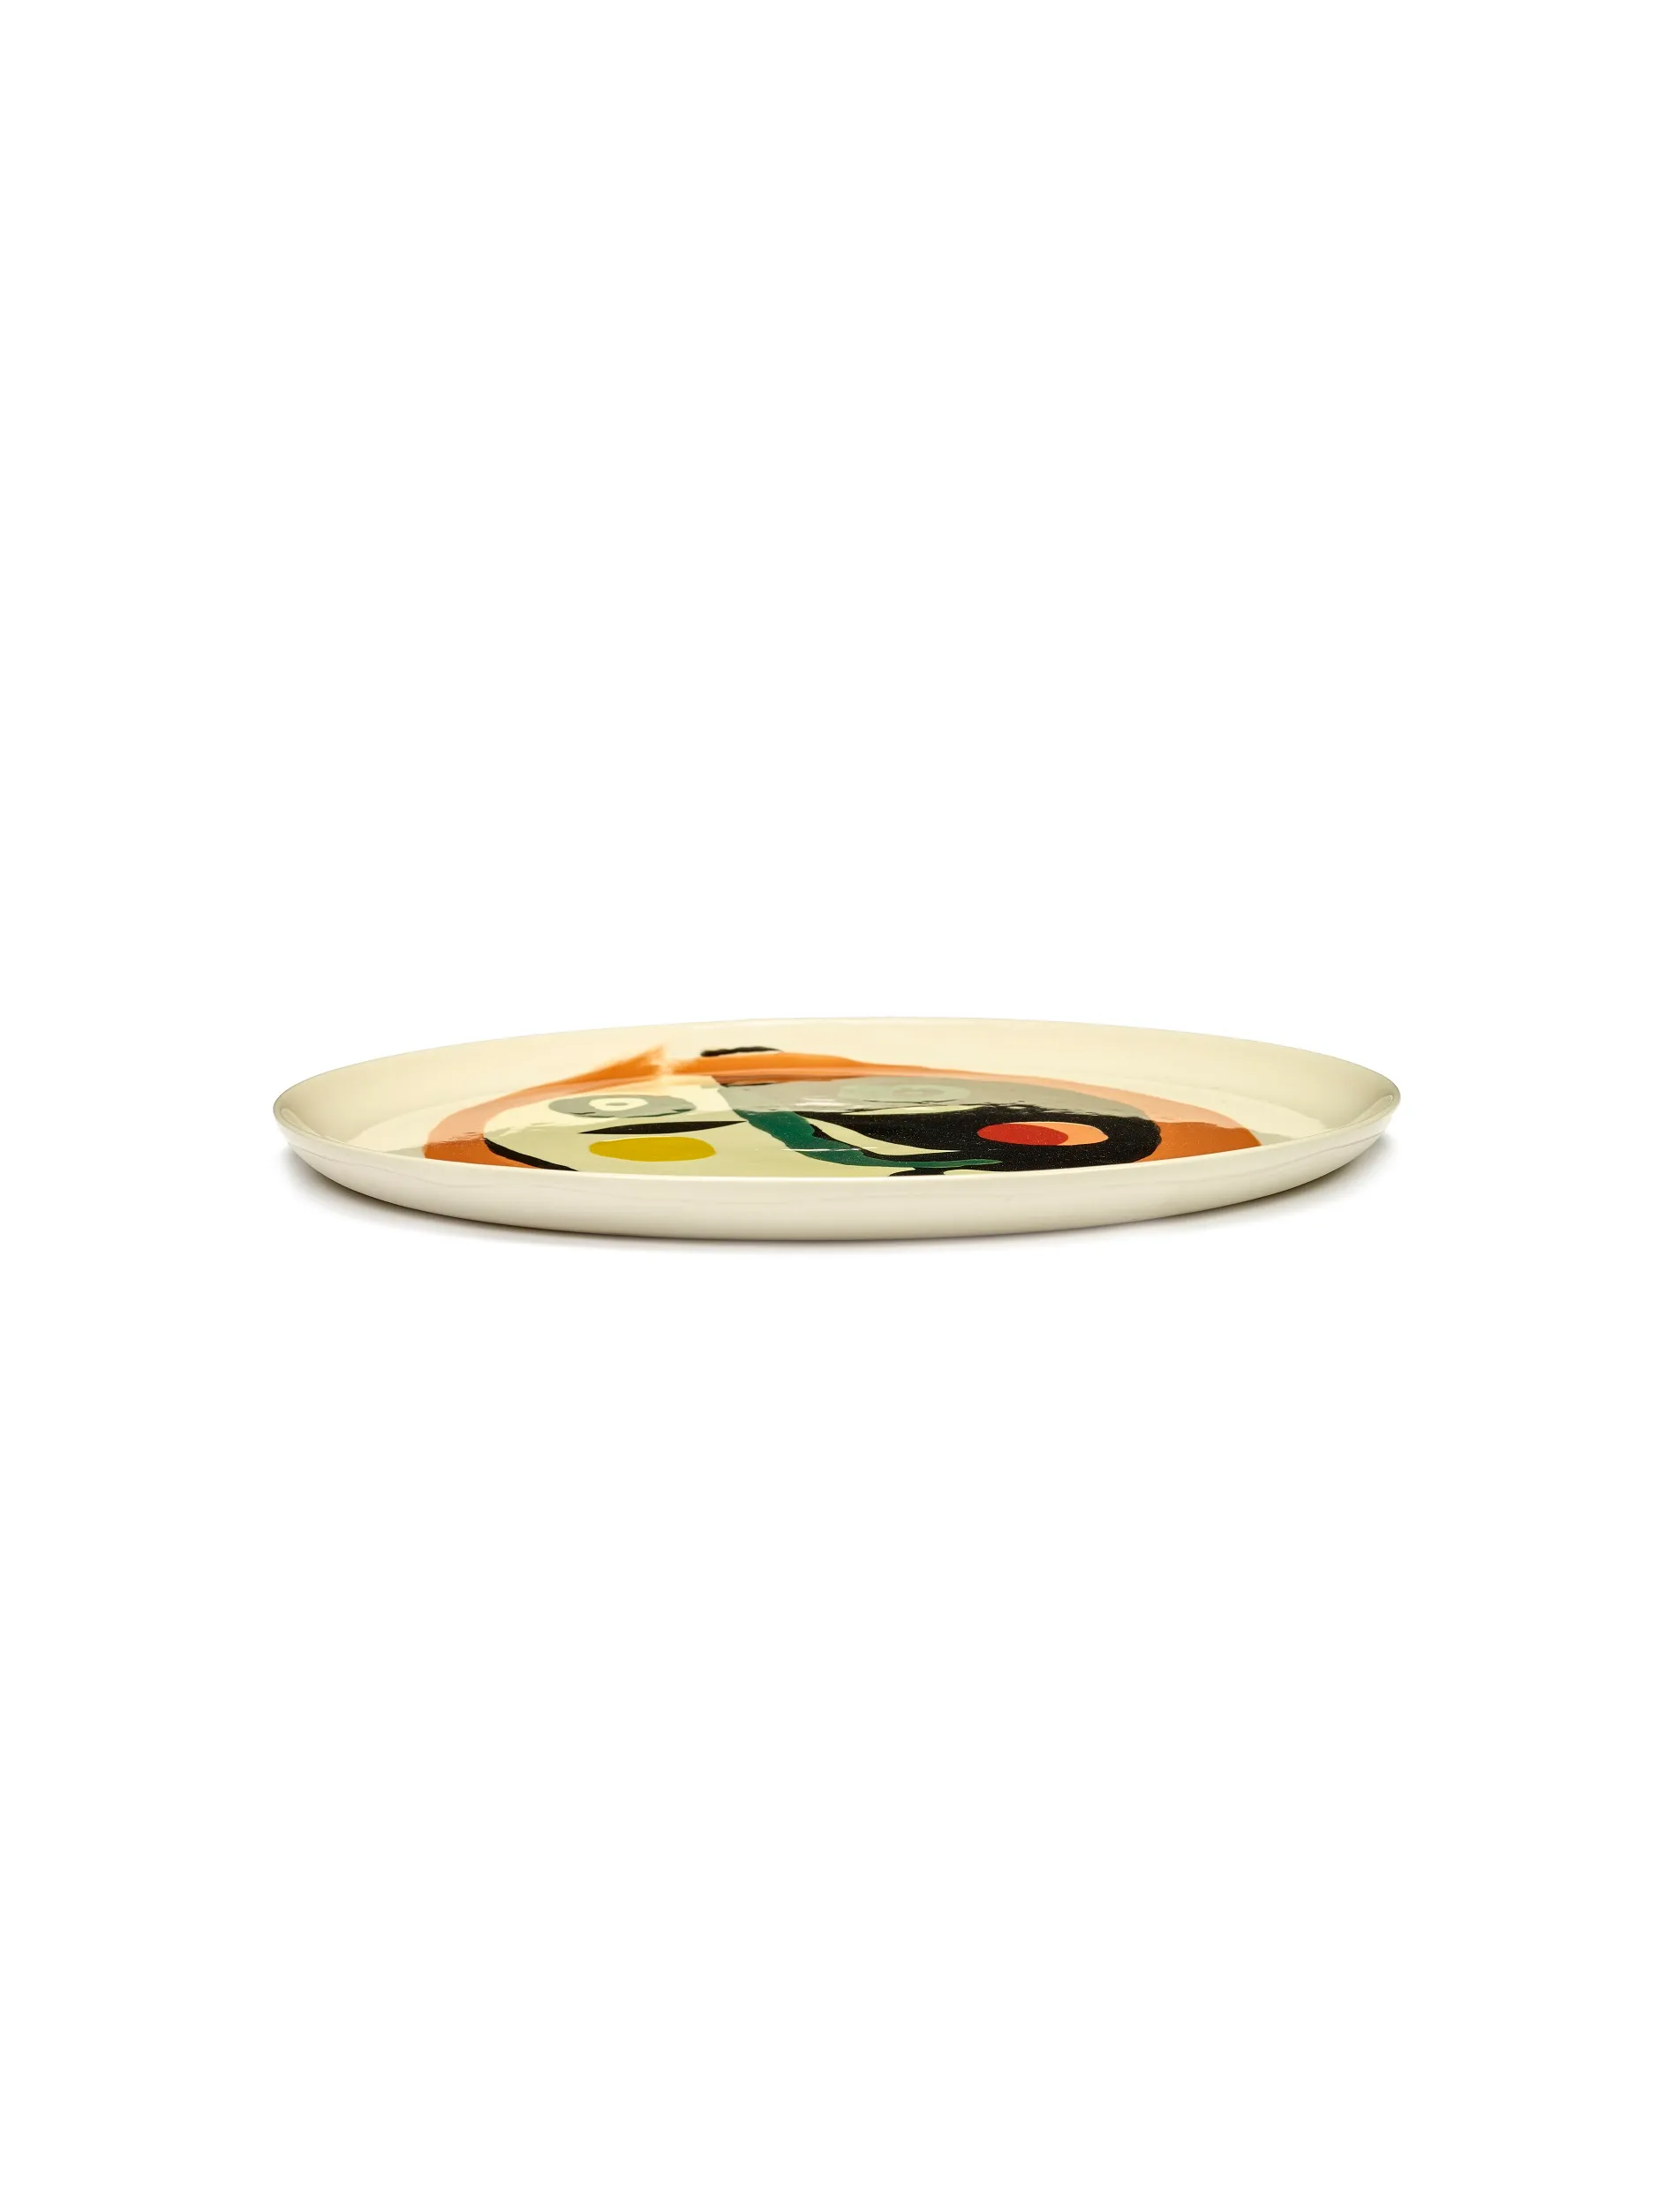 Serving Plate Face 1 Feast Ottolenghi by Serax L 35 W 35 H 2 CM